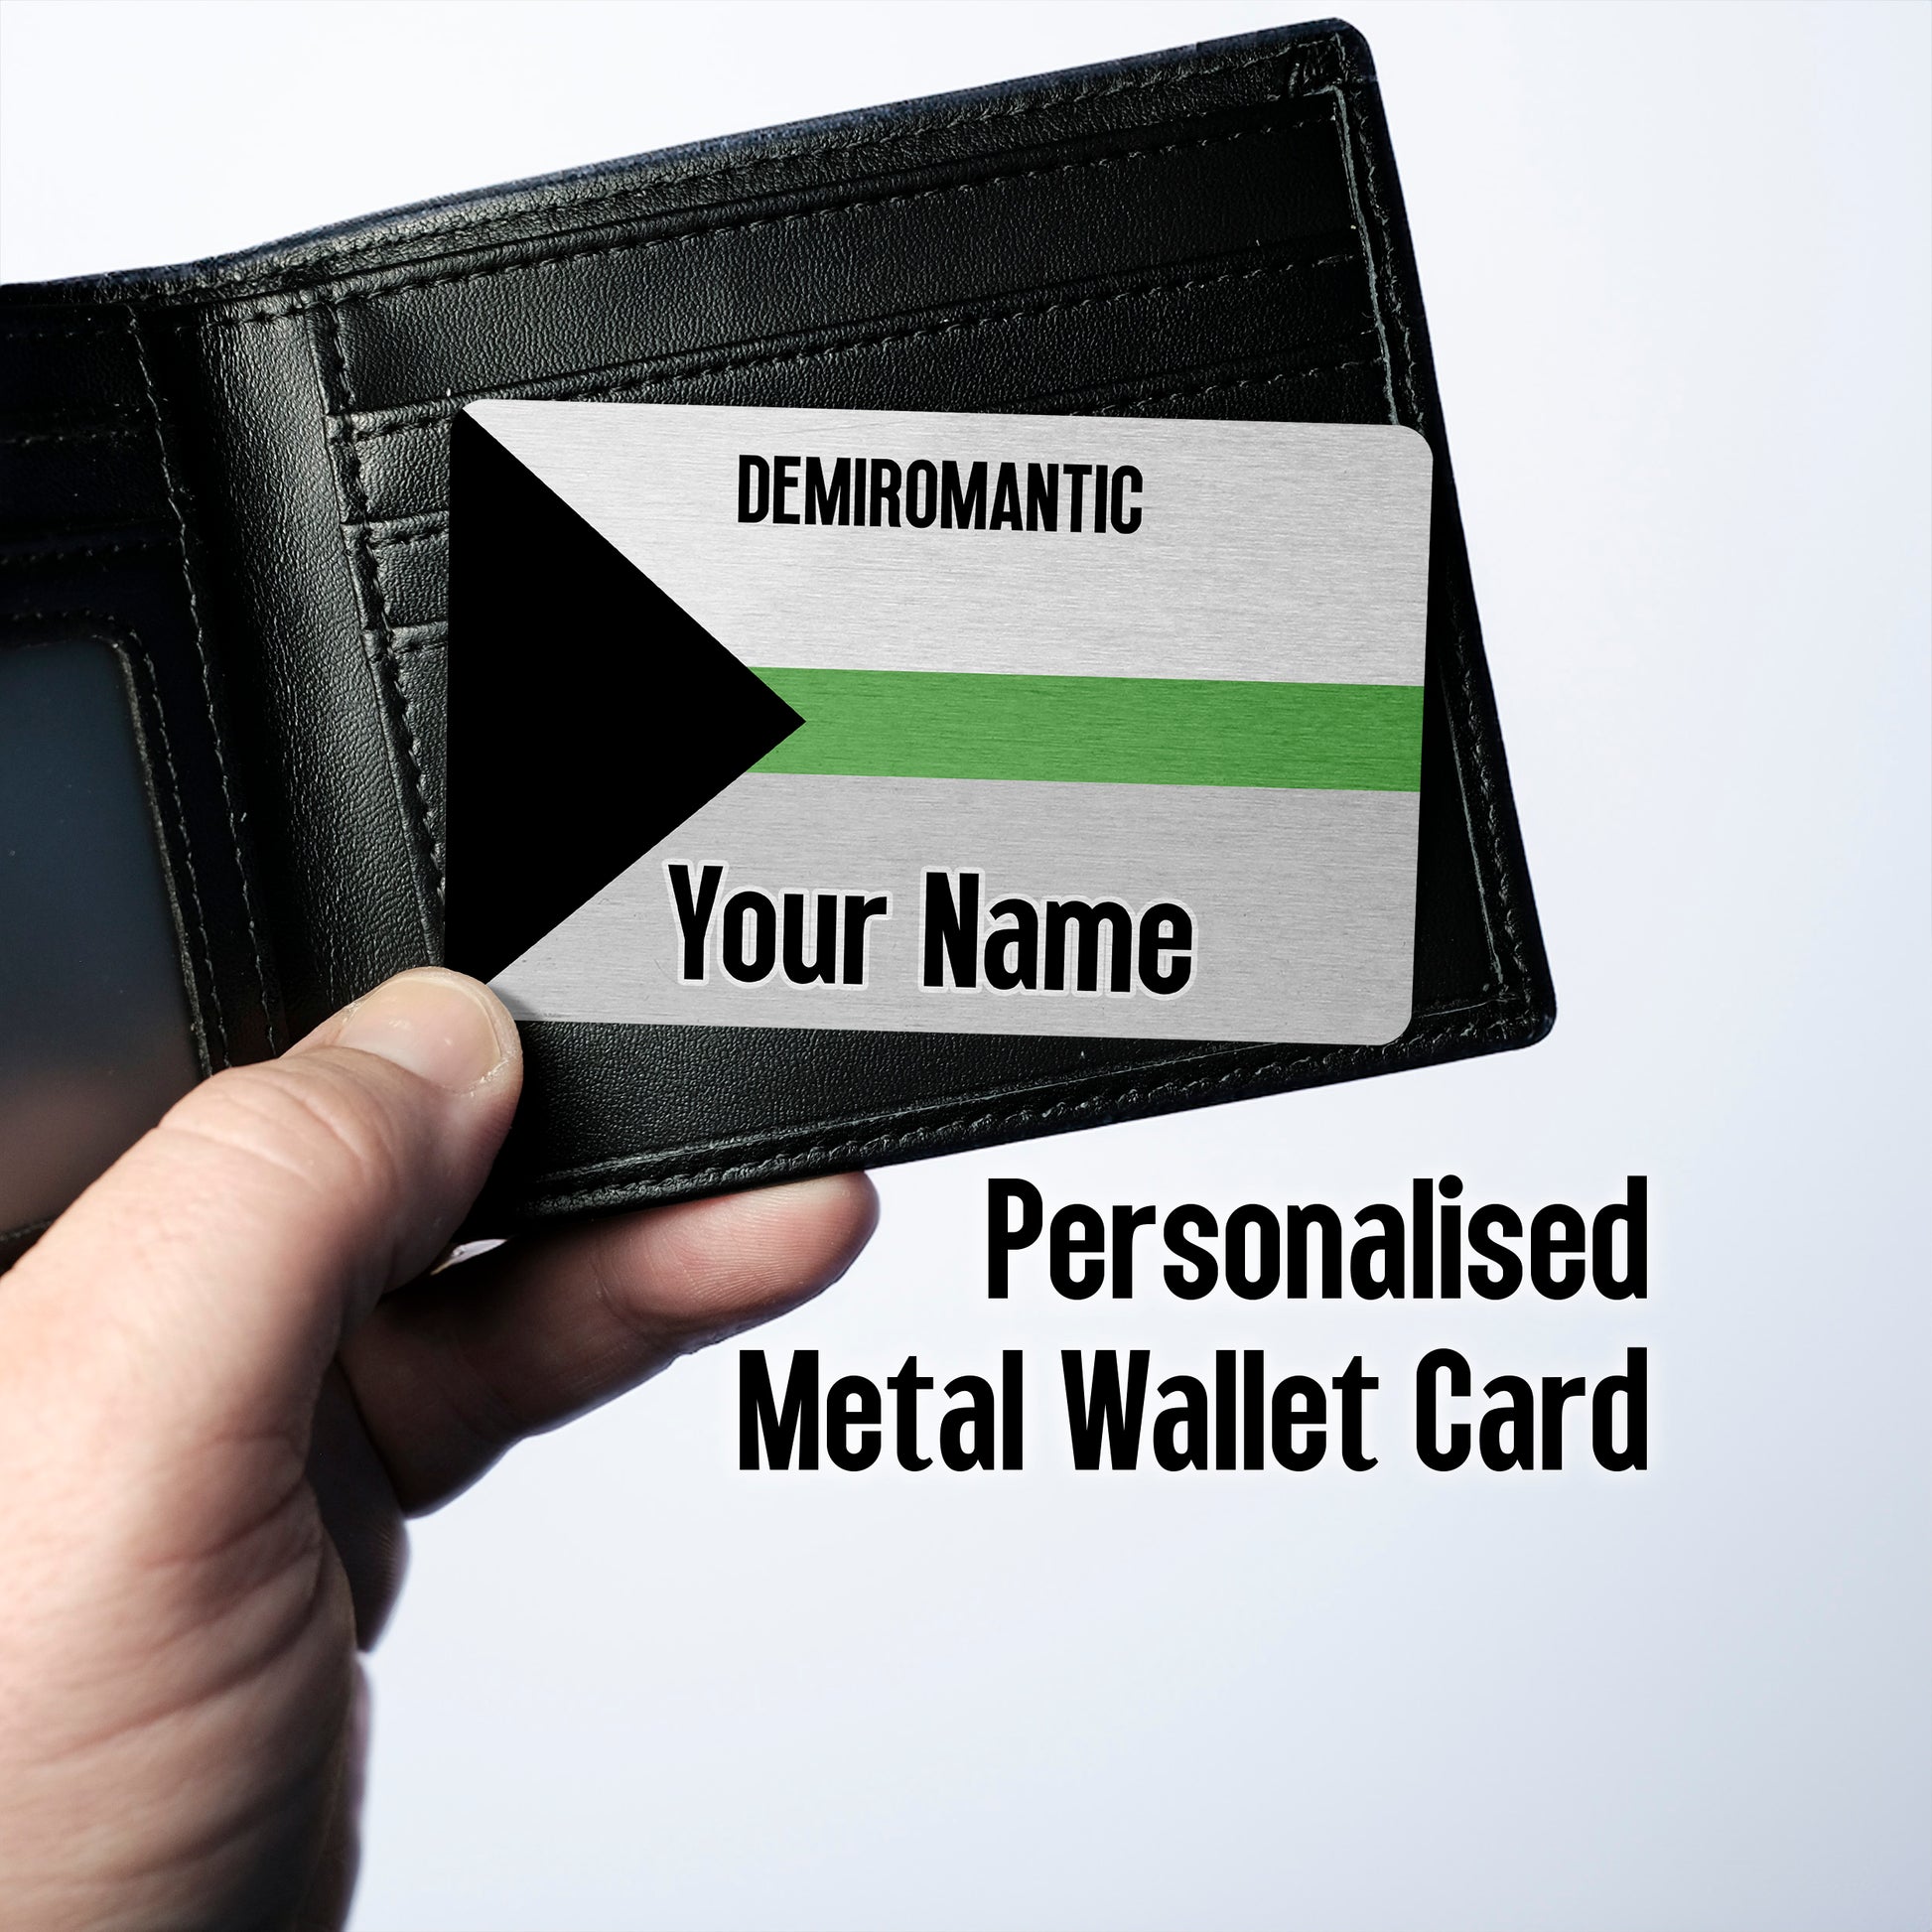 Aluminium wallet card personalised with your name and the demiromantic pride flag